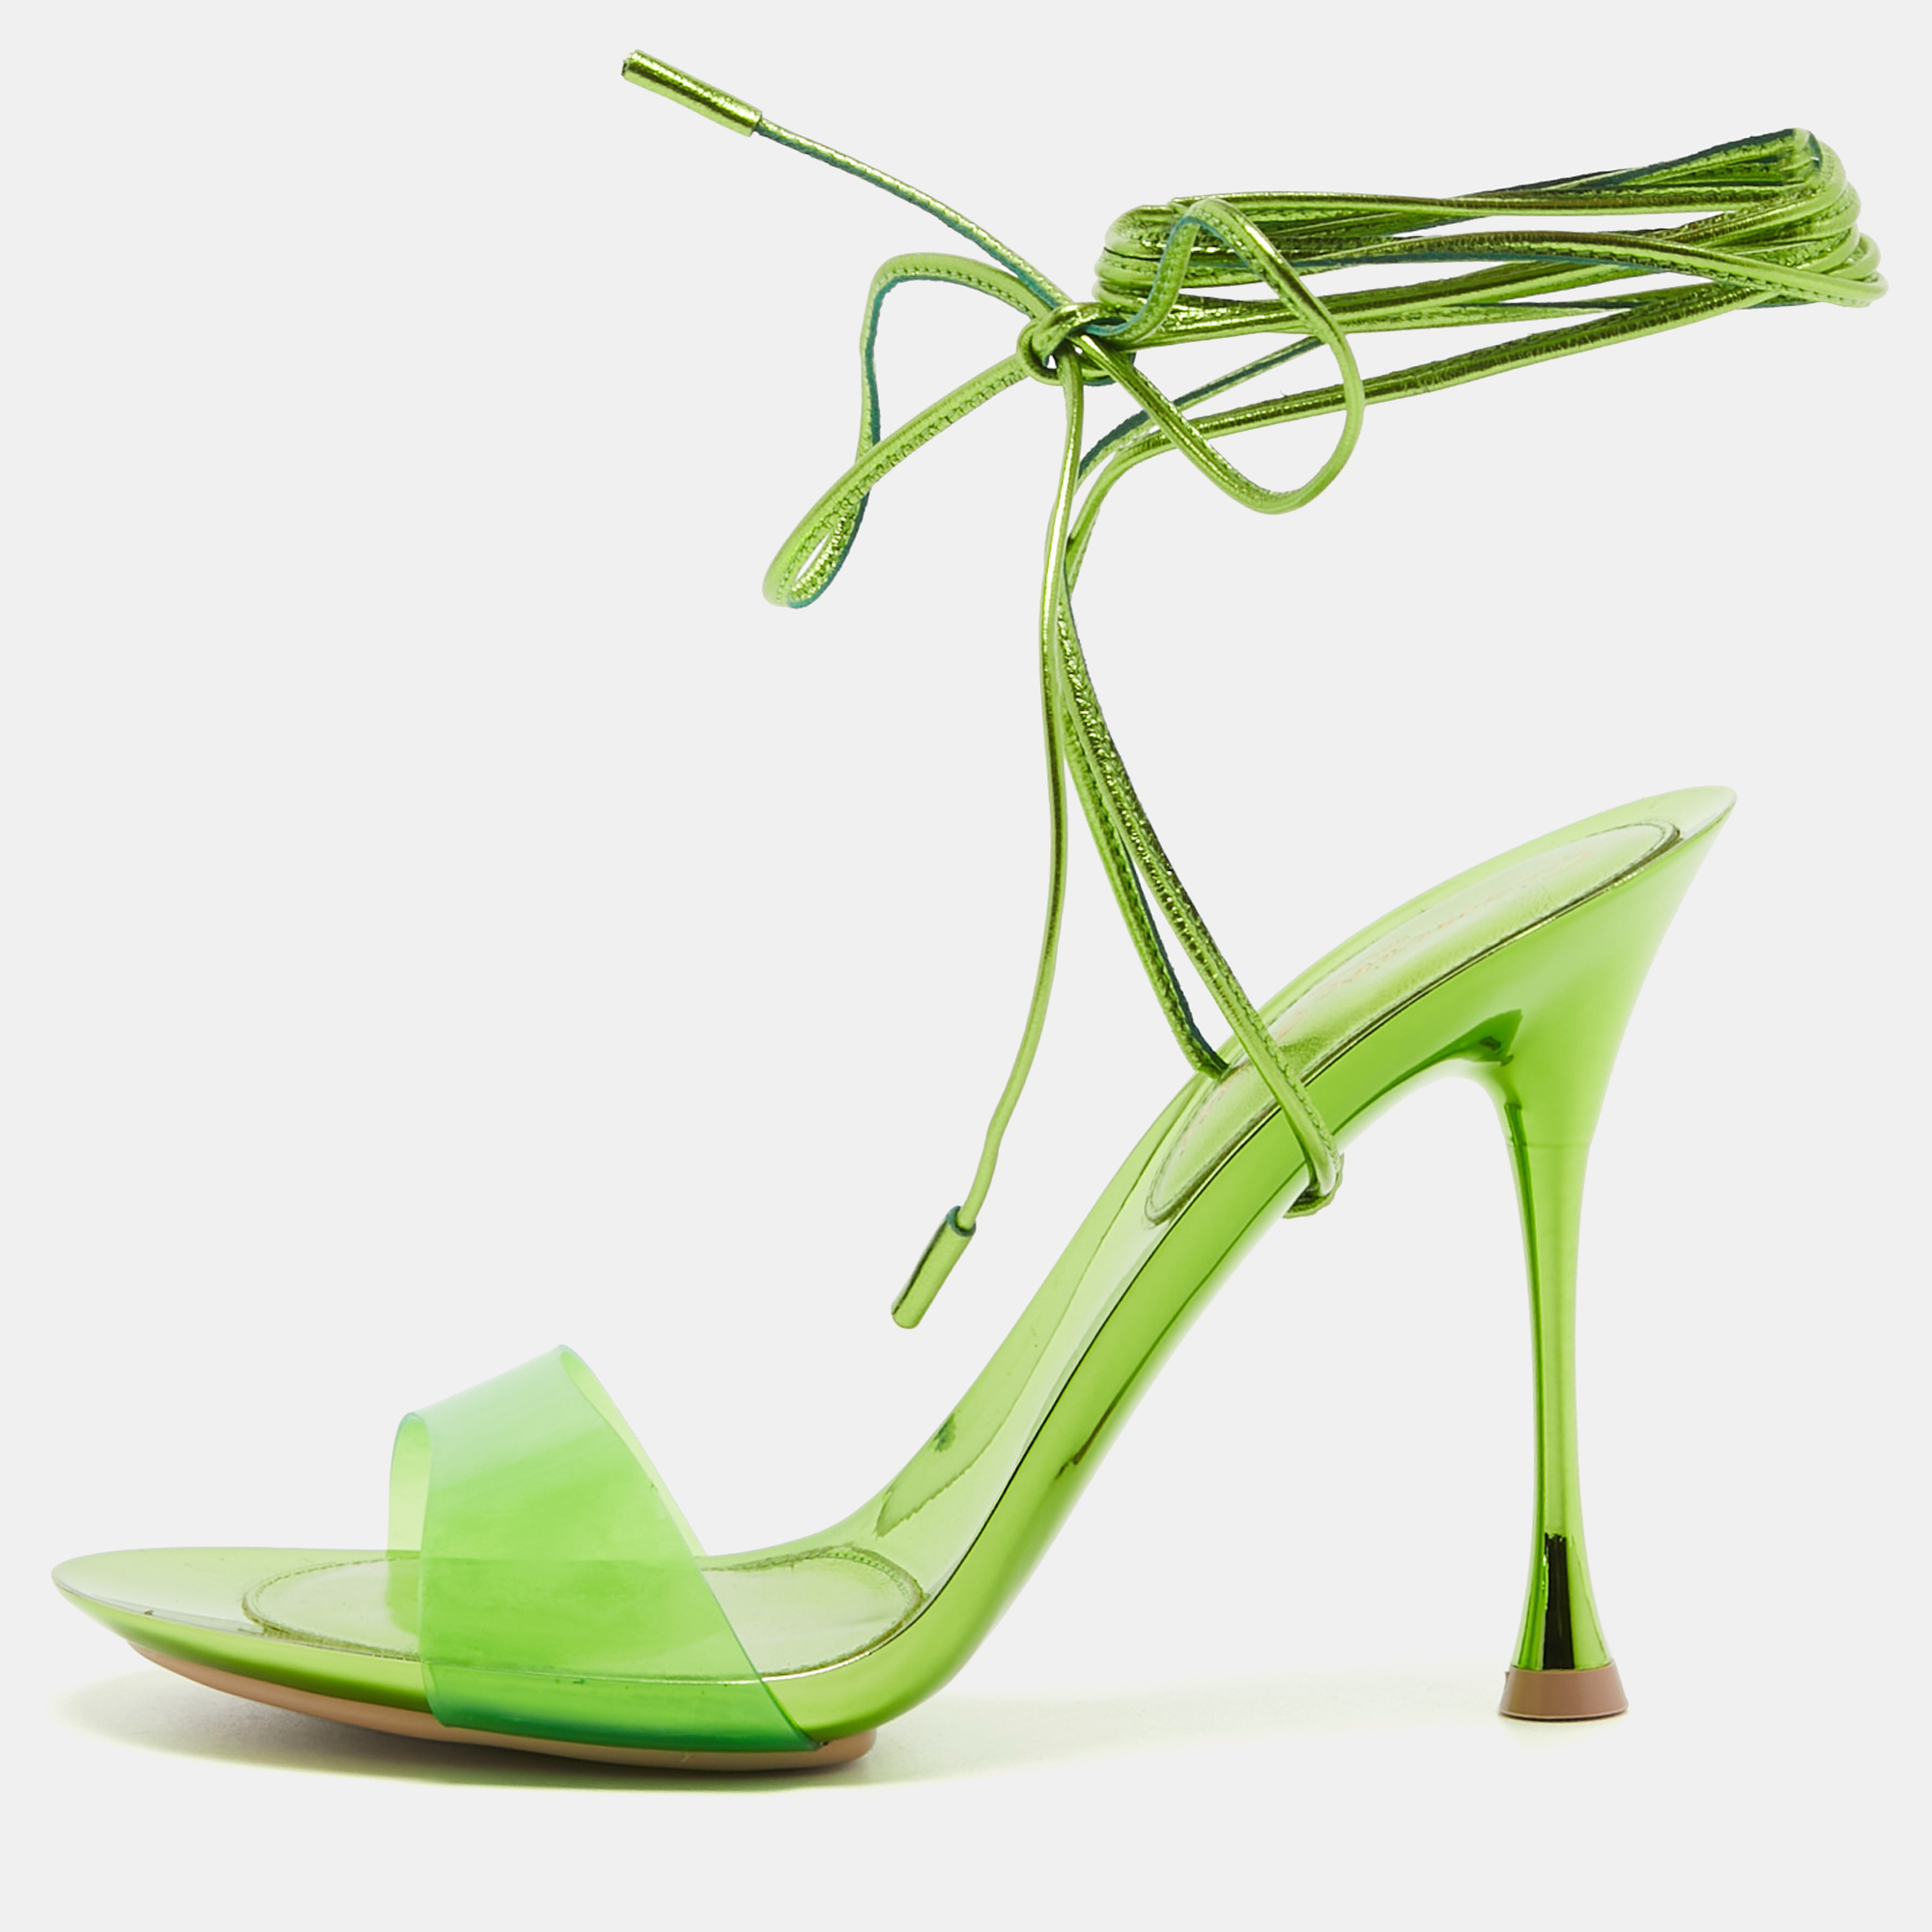 Indulge in luxury with Gianvito Rossis Spice ankle tie Sandals. Crafted with meticulous attention to detail these sandals boast a captivating blend of green PVC and supple leather culminating in a sophisticated ankle tie design that exudes elegance and charm.